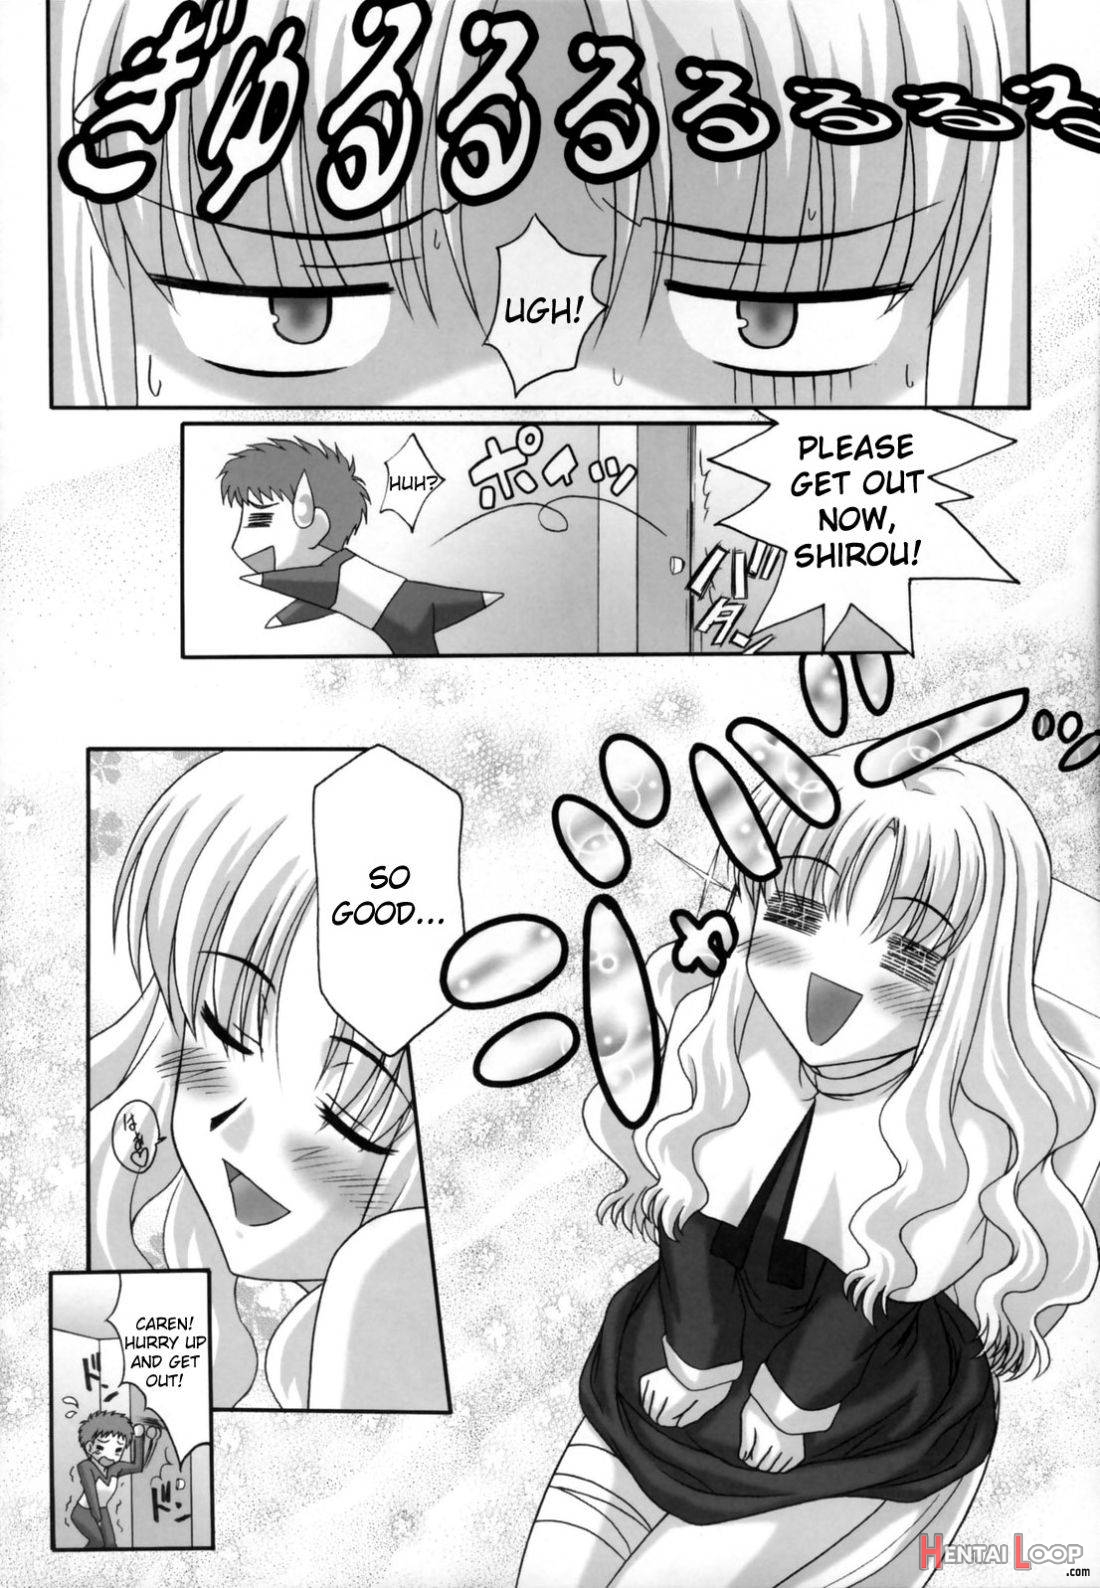 Madness of sister page 14